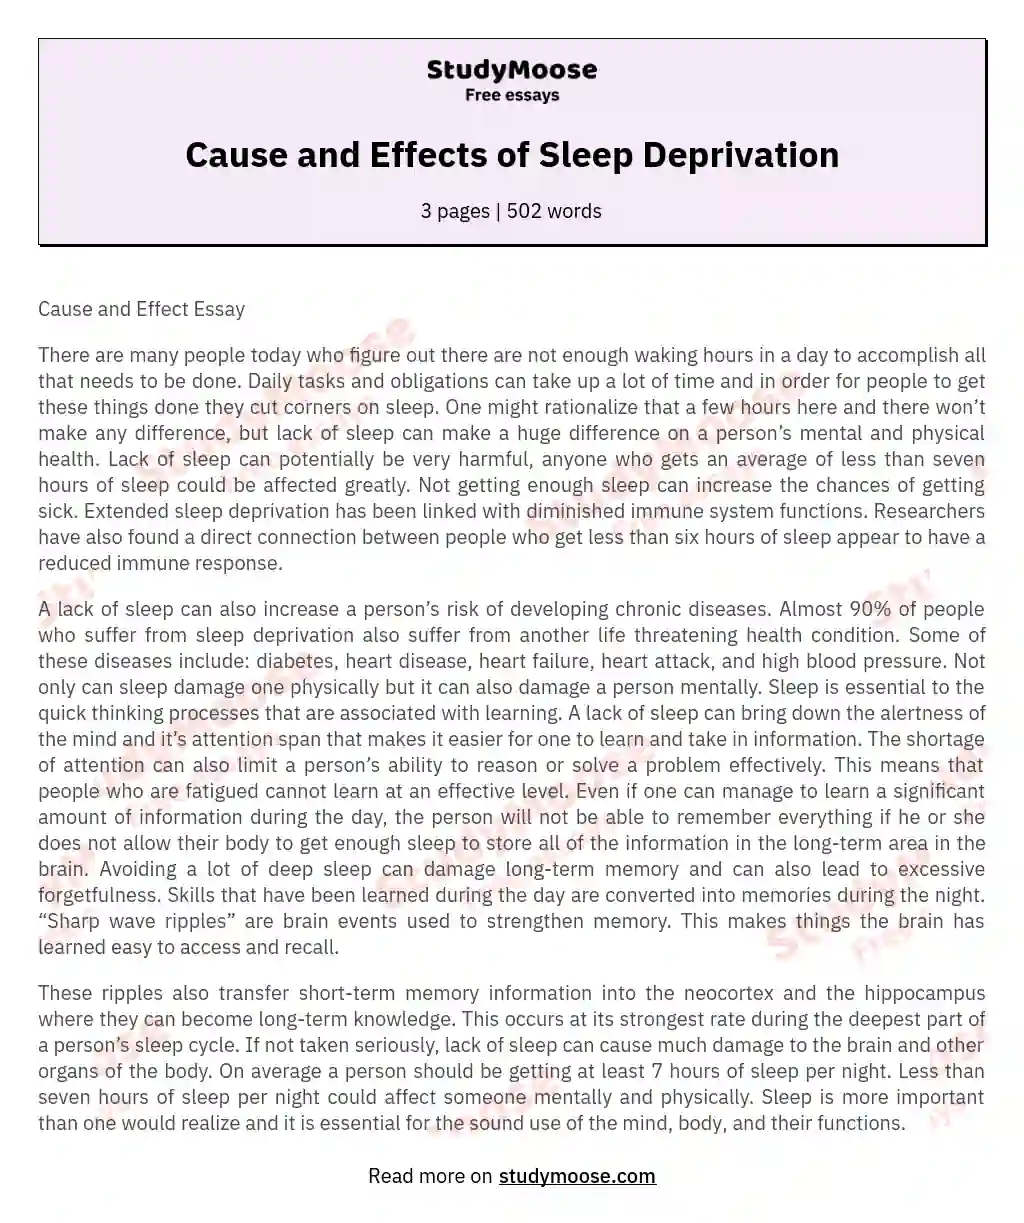 Cause and Effects of Sleep Deprivation essay